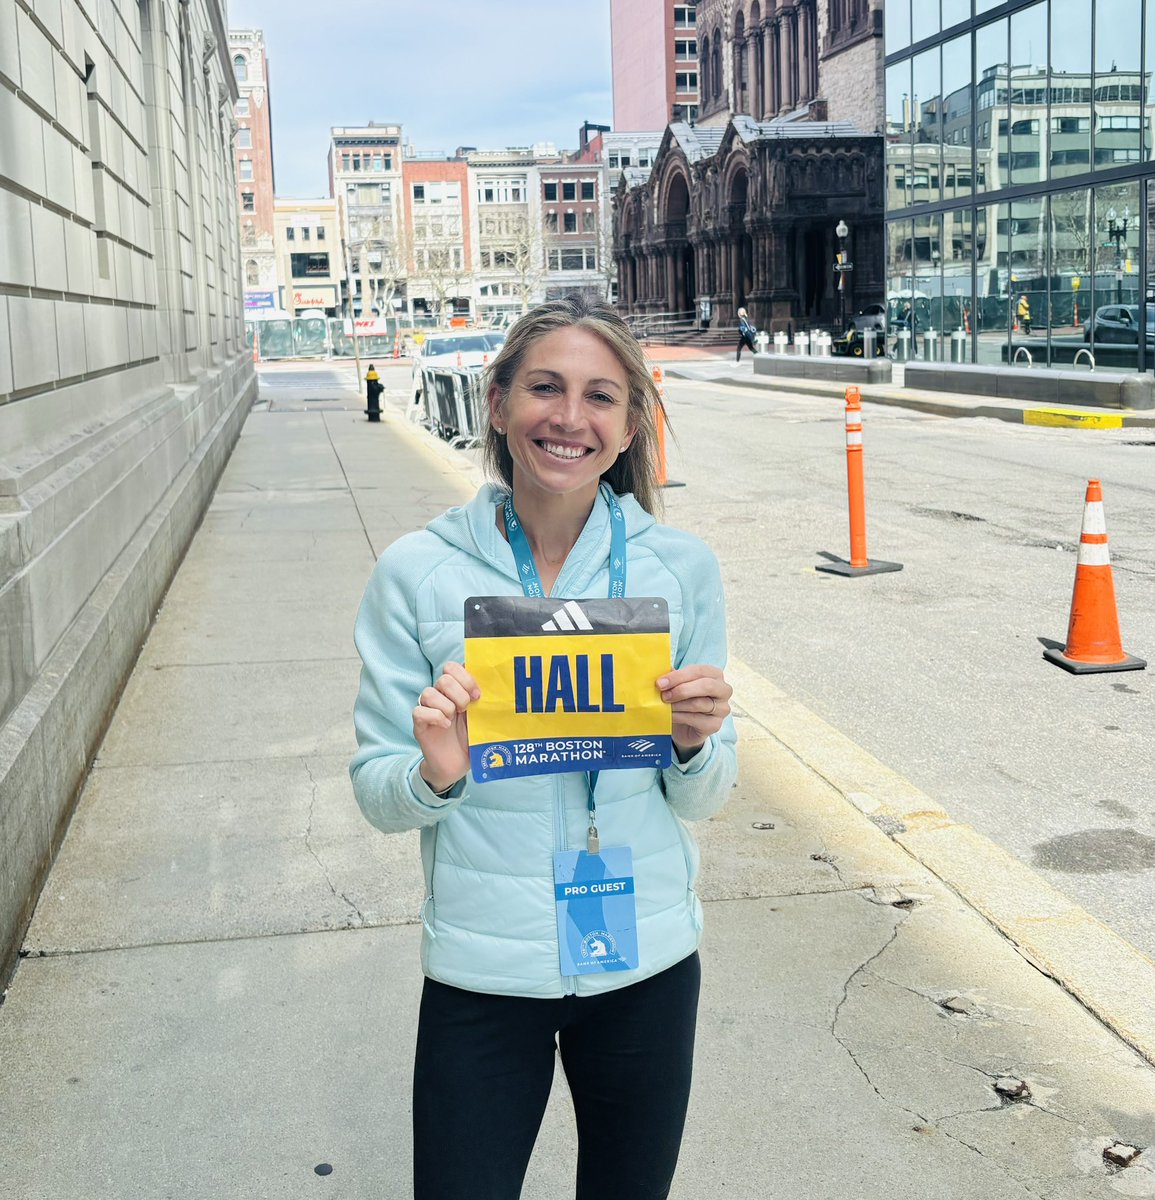 The very best birthday gift- I get to run @bostonmarathon in the morning! I’m just giddy to be out there tomorrow! I’m obsessed with this race. From the minute I crossed the finish line last year I’ve been telling my agent I was 110% on coming back here to see what I could do